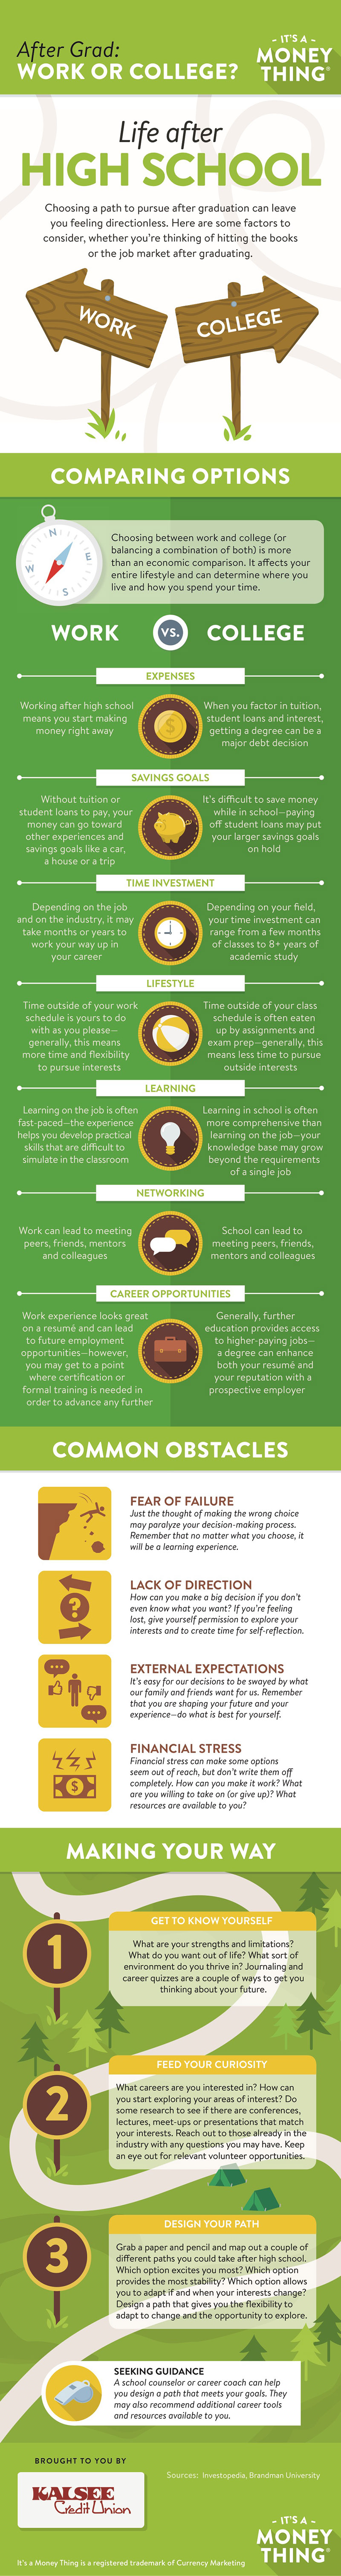 After grad, work or college infographic, click for transcription